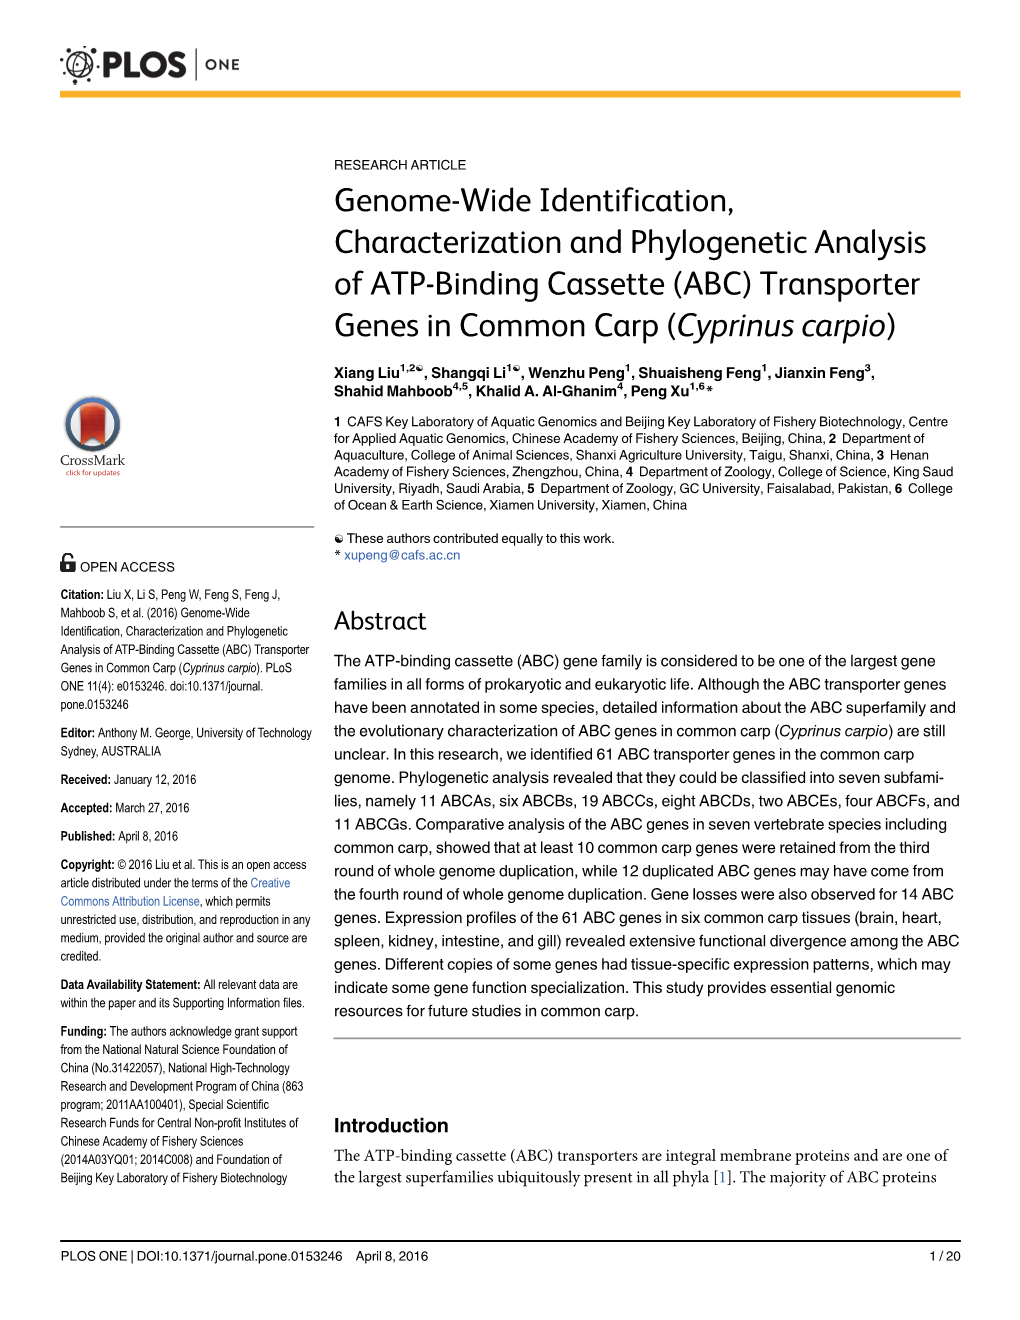 Genome-Wide Identification, Characterization and Phylogenetic Analysis of ATP-Binding Cassette (ABC) Transporter Genes in Common Carp (Cyprinus Carpio)